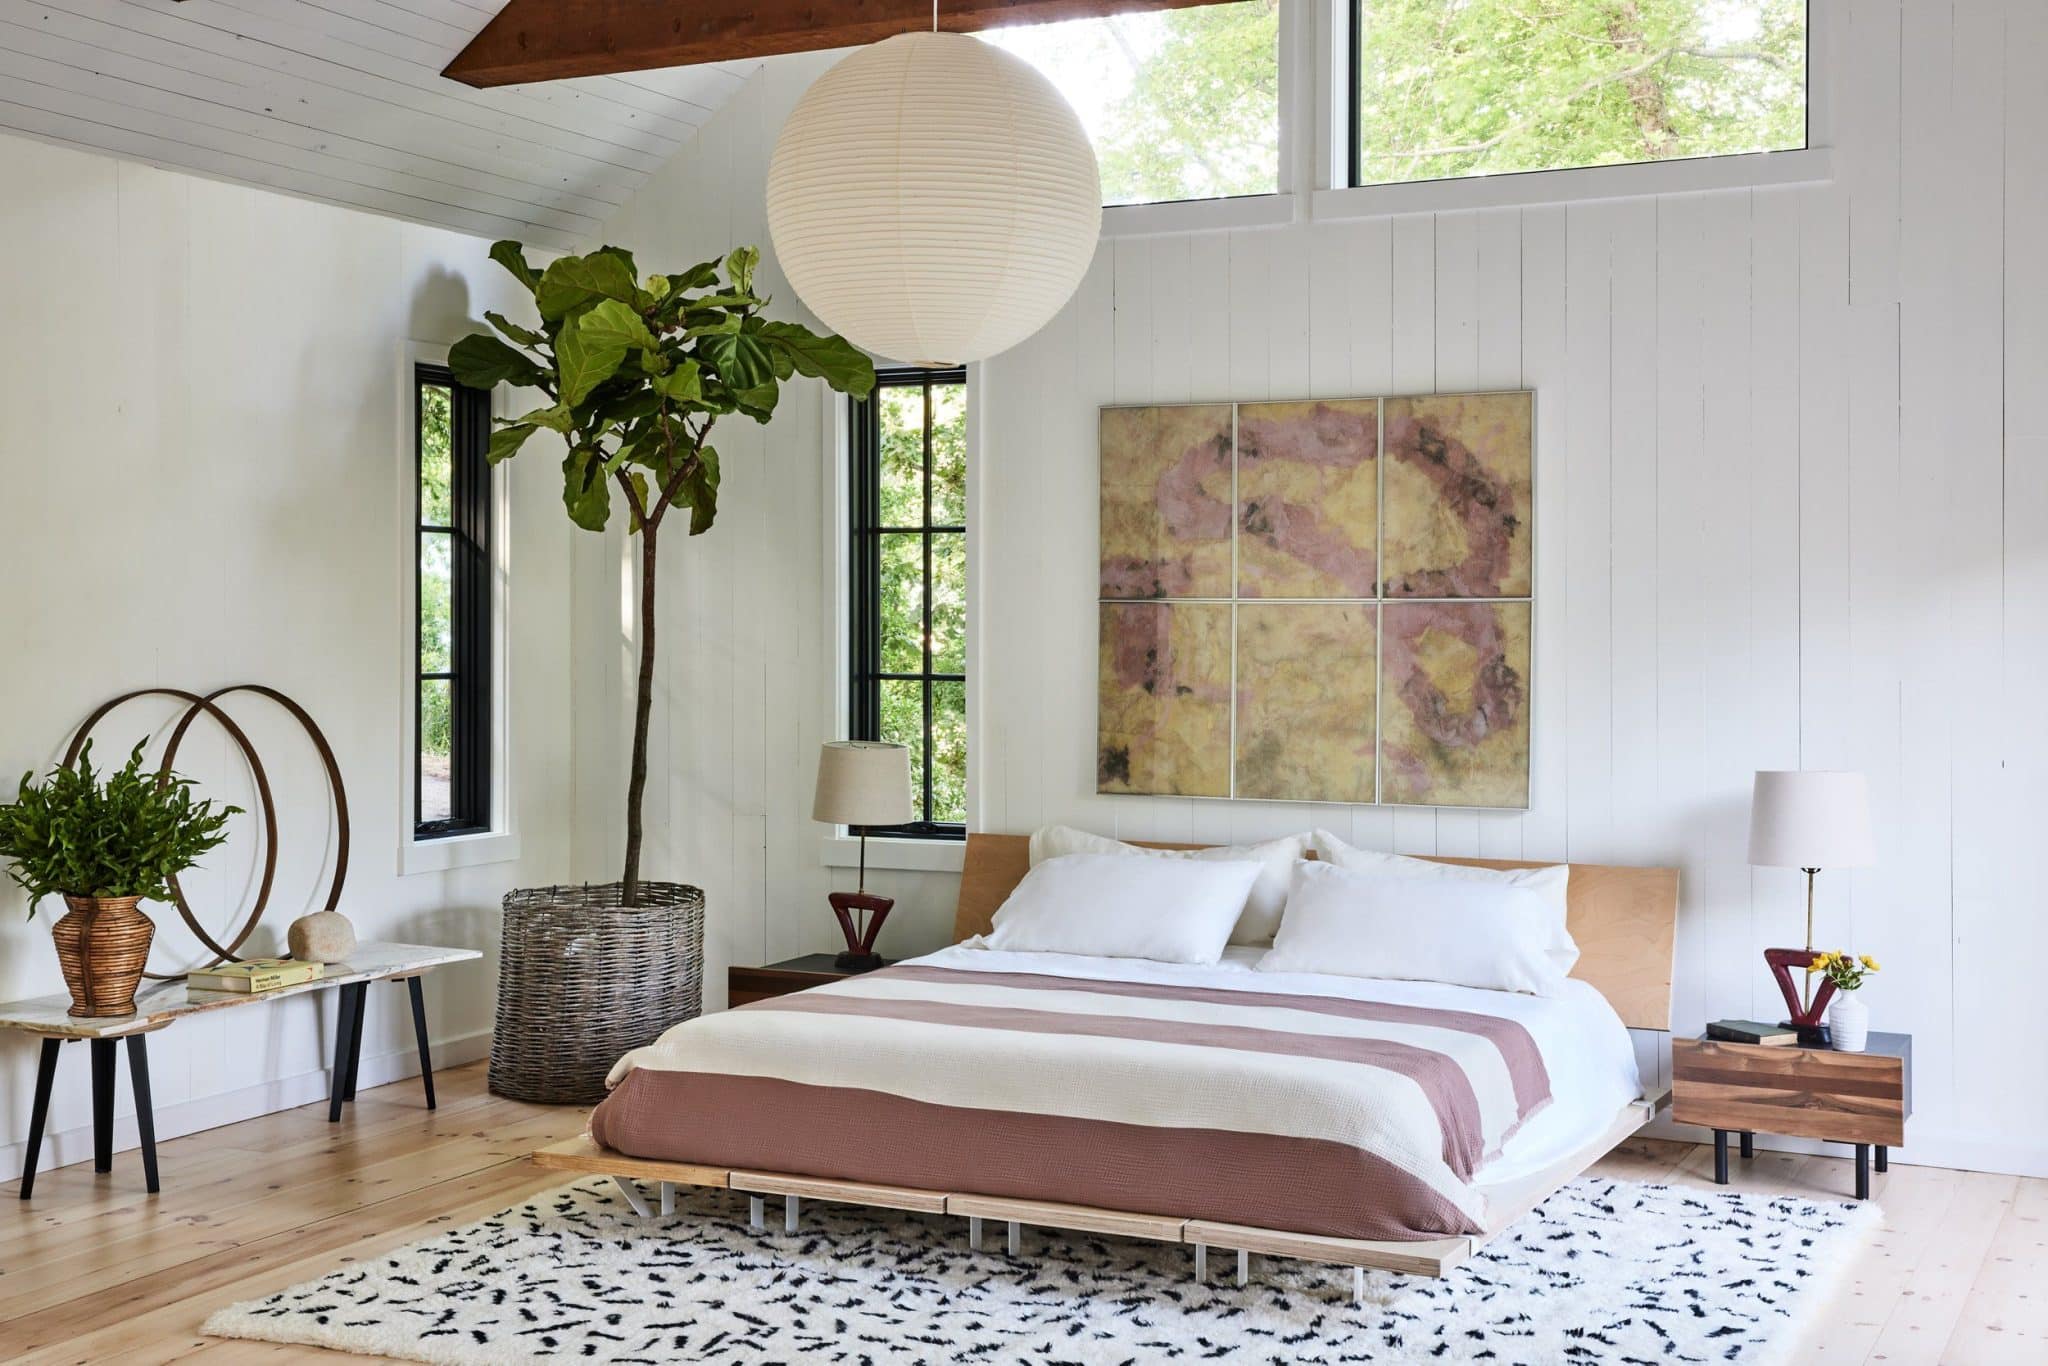 How Can Neutral Colors Enhance the Tranquility of a Bedroom?